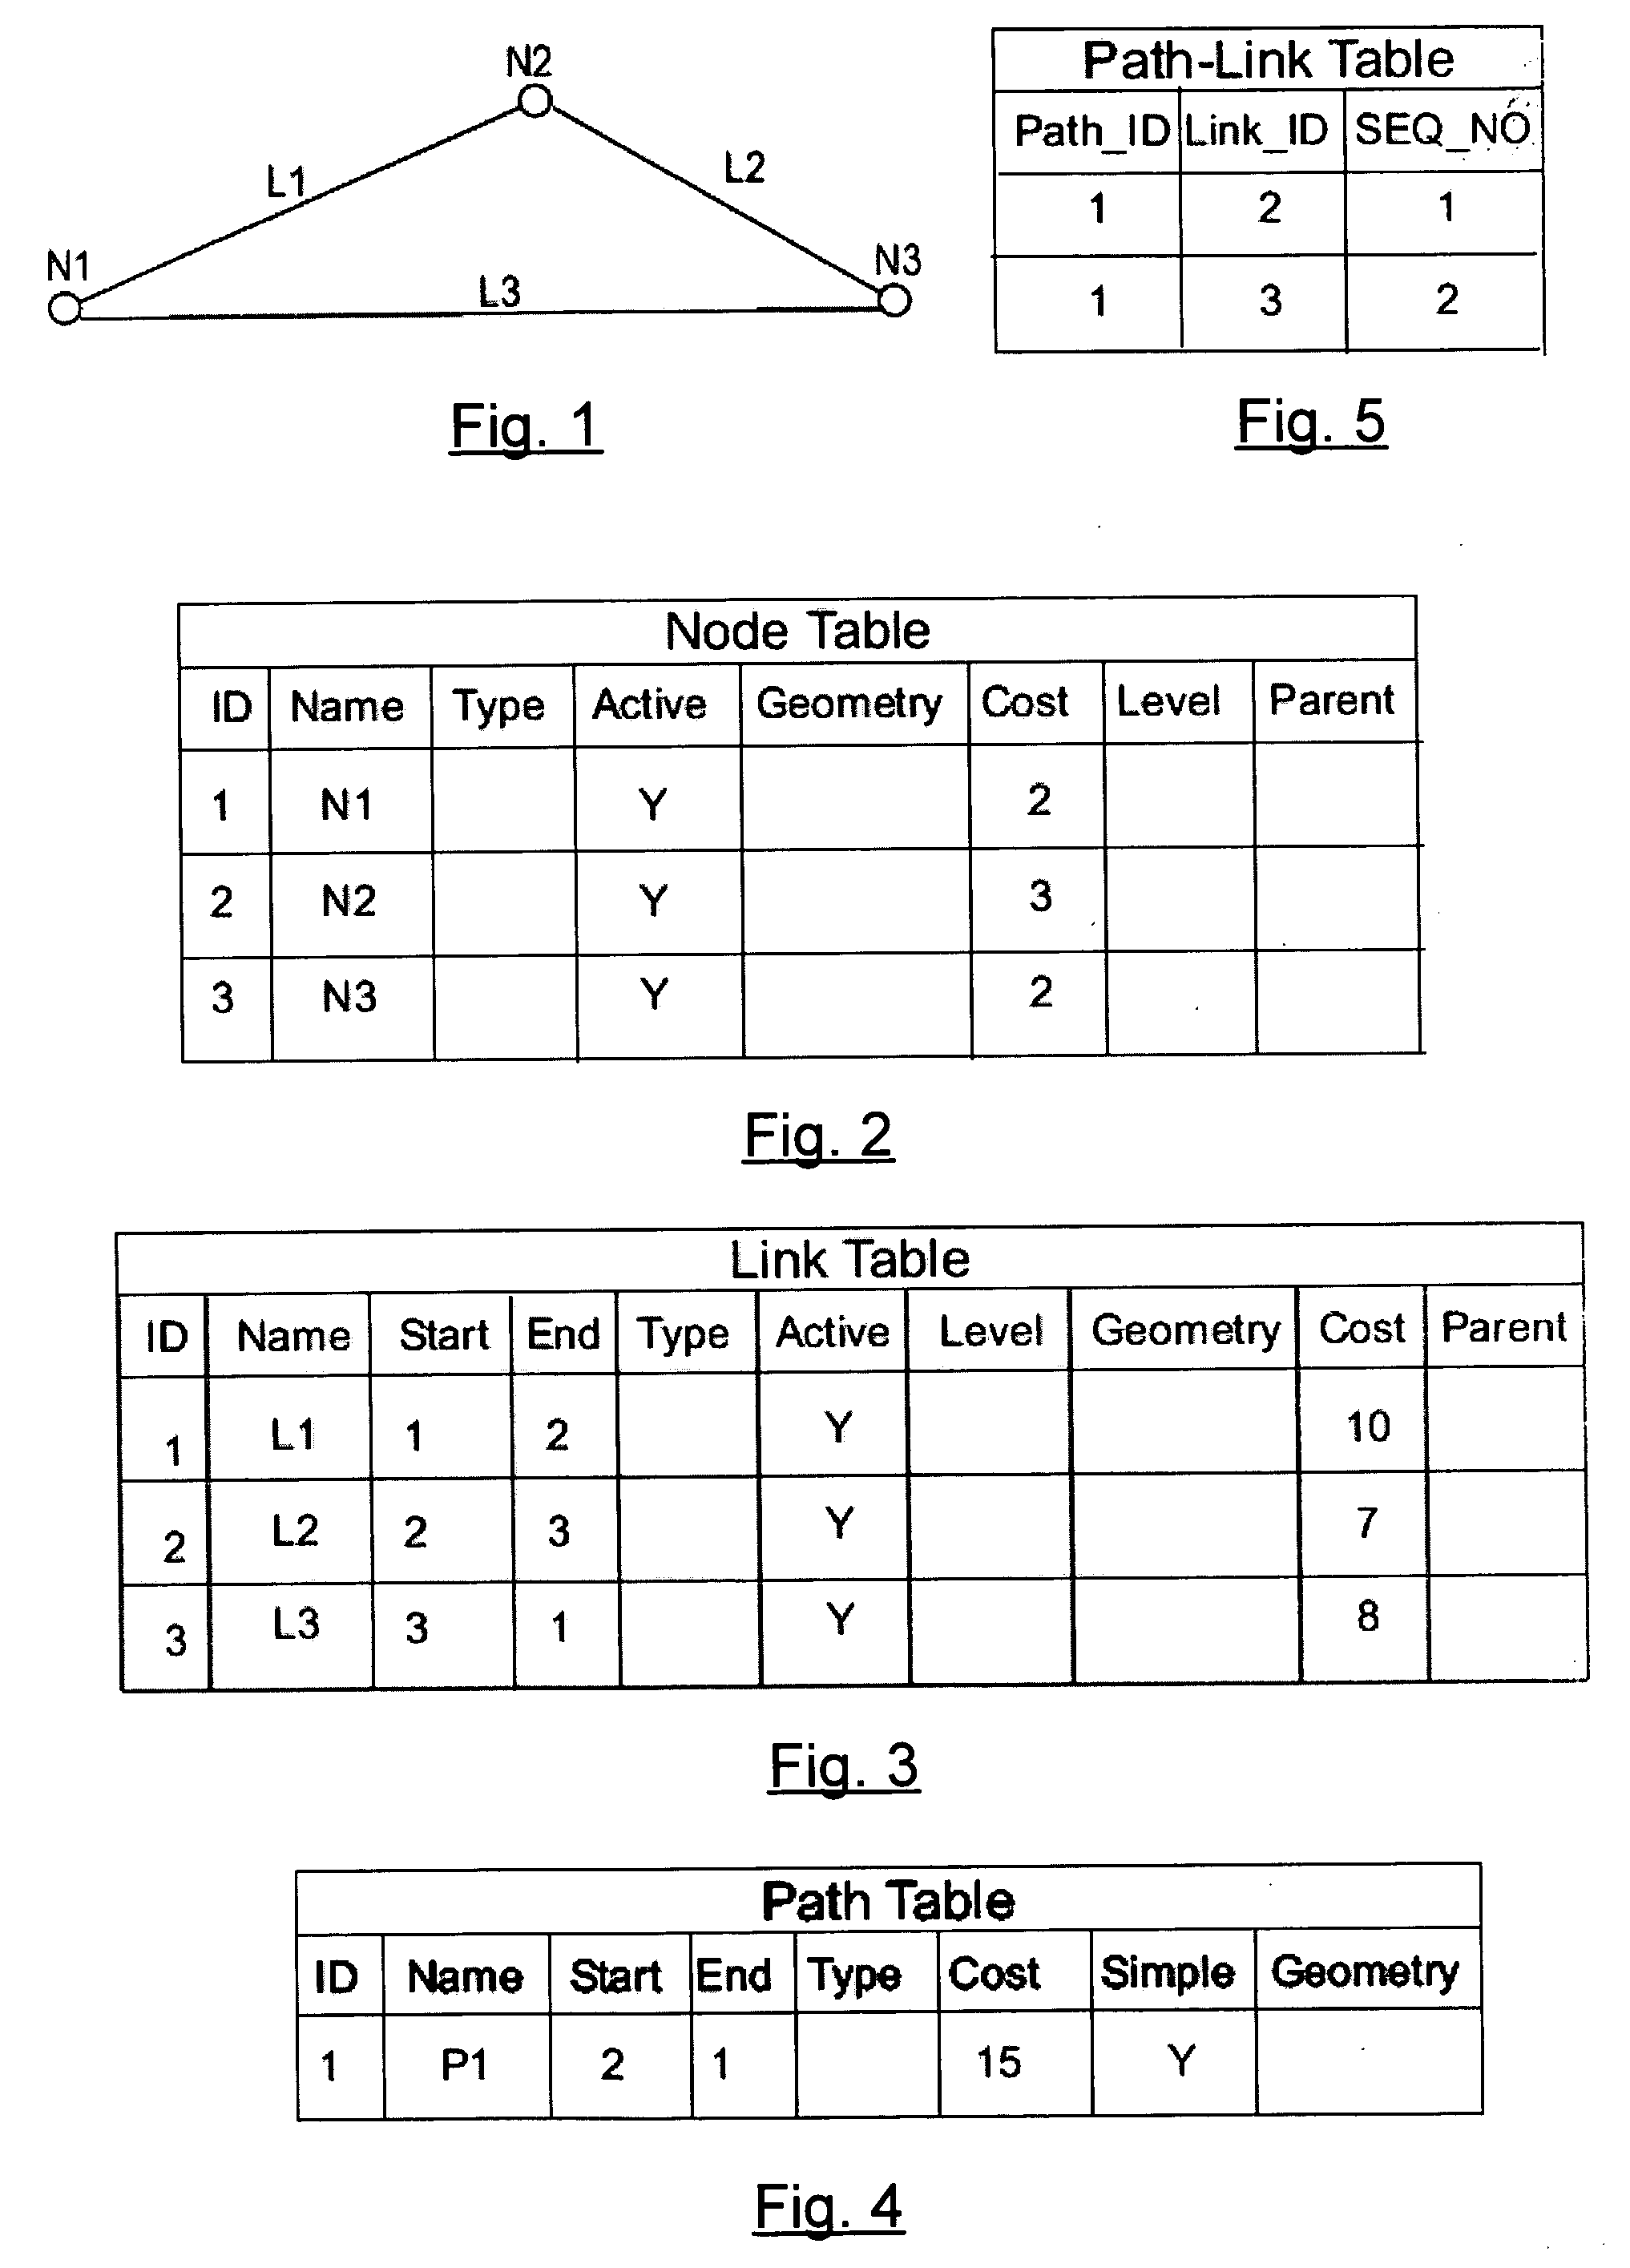 Incorporating network constraints into a network data model for a relational database management system